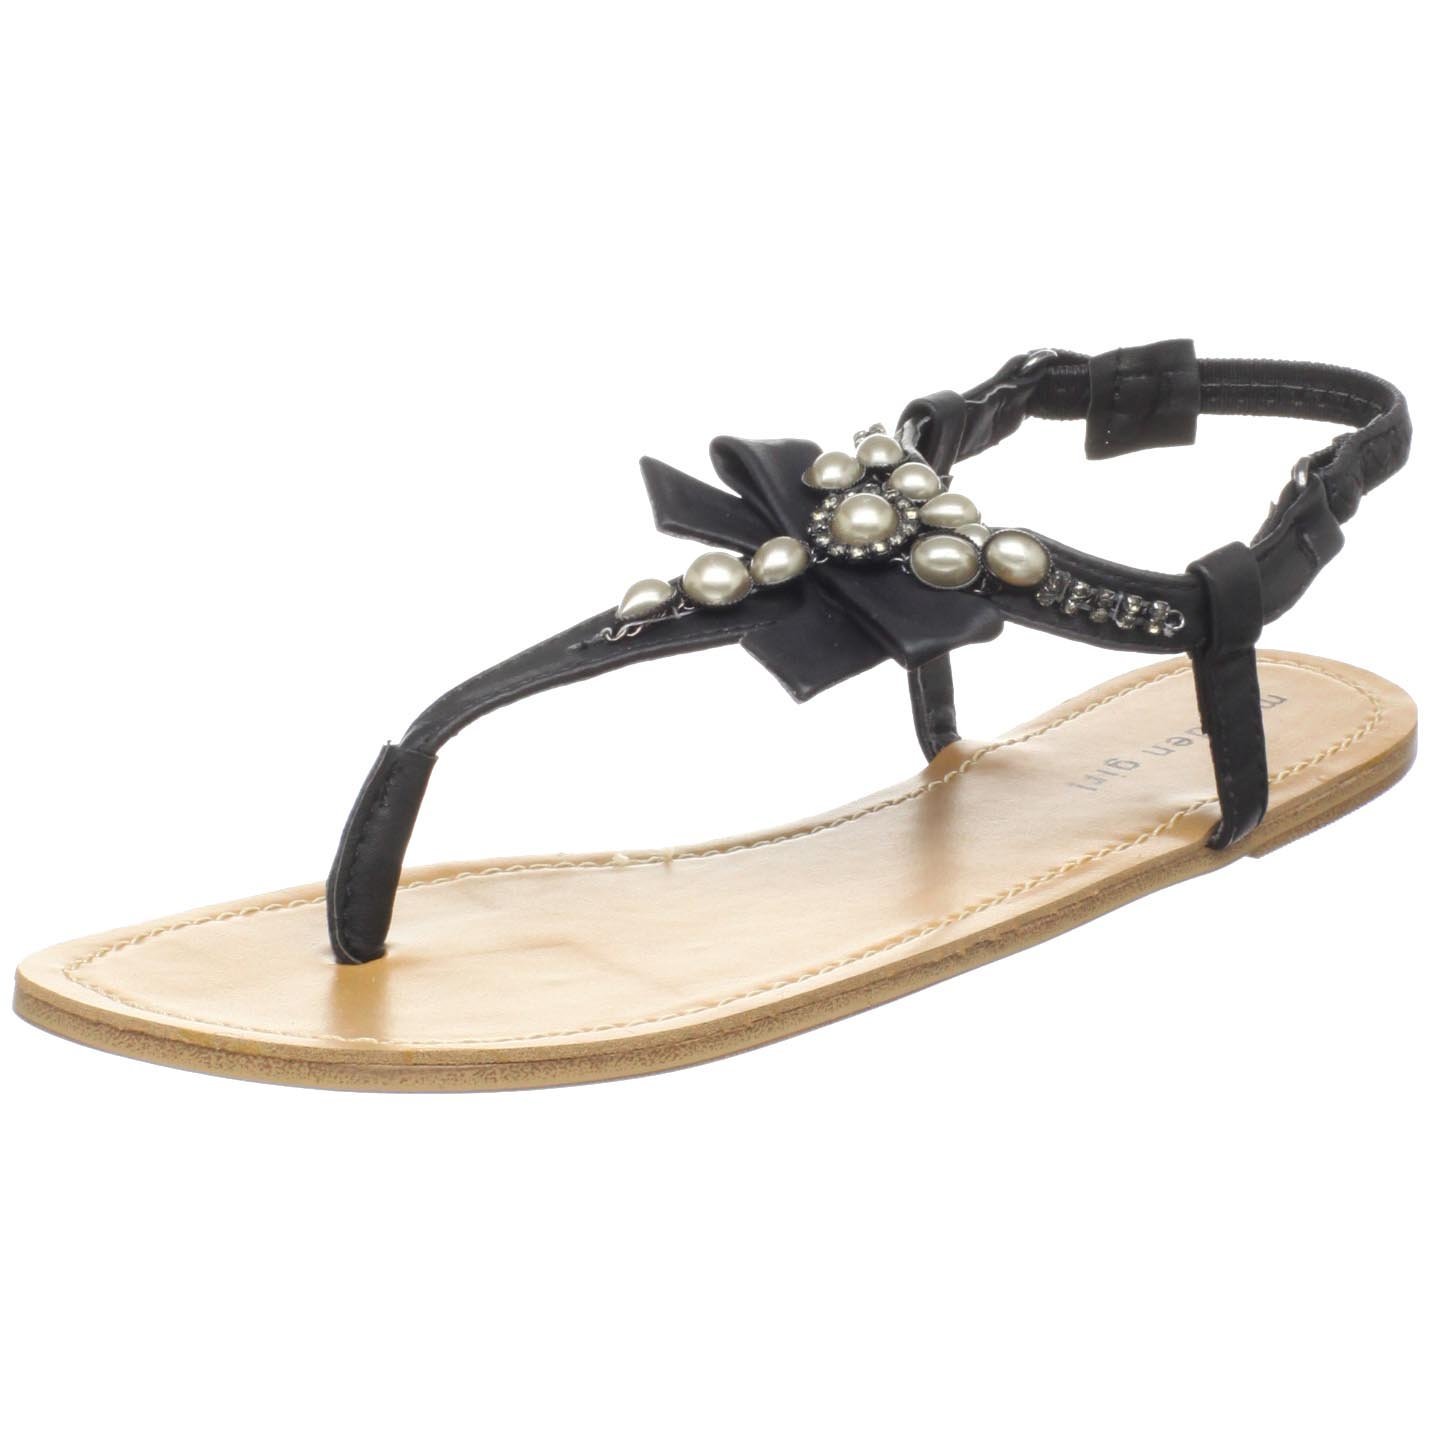 Aimee's Picks for the Best Designs of Elegant Thongs and Sandals: Black ...